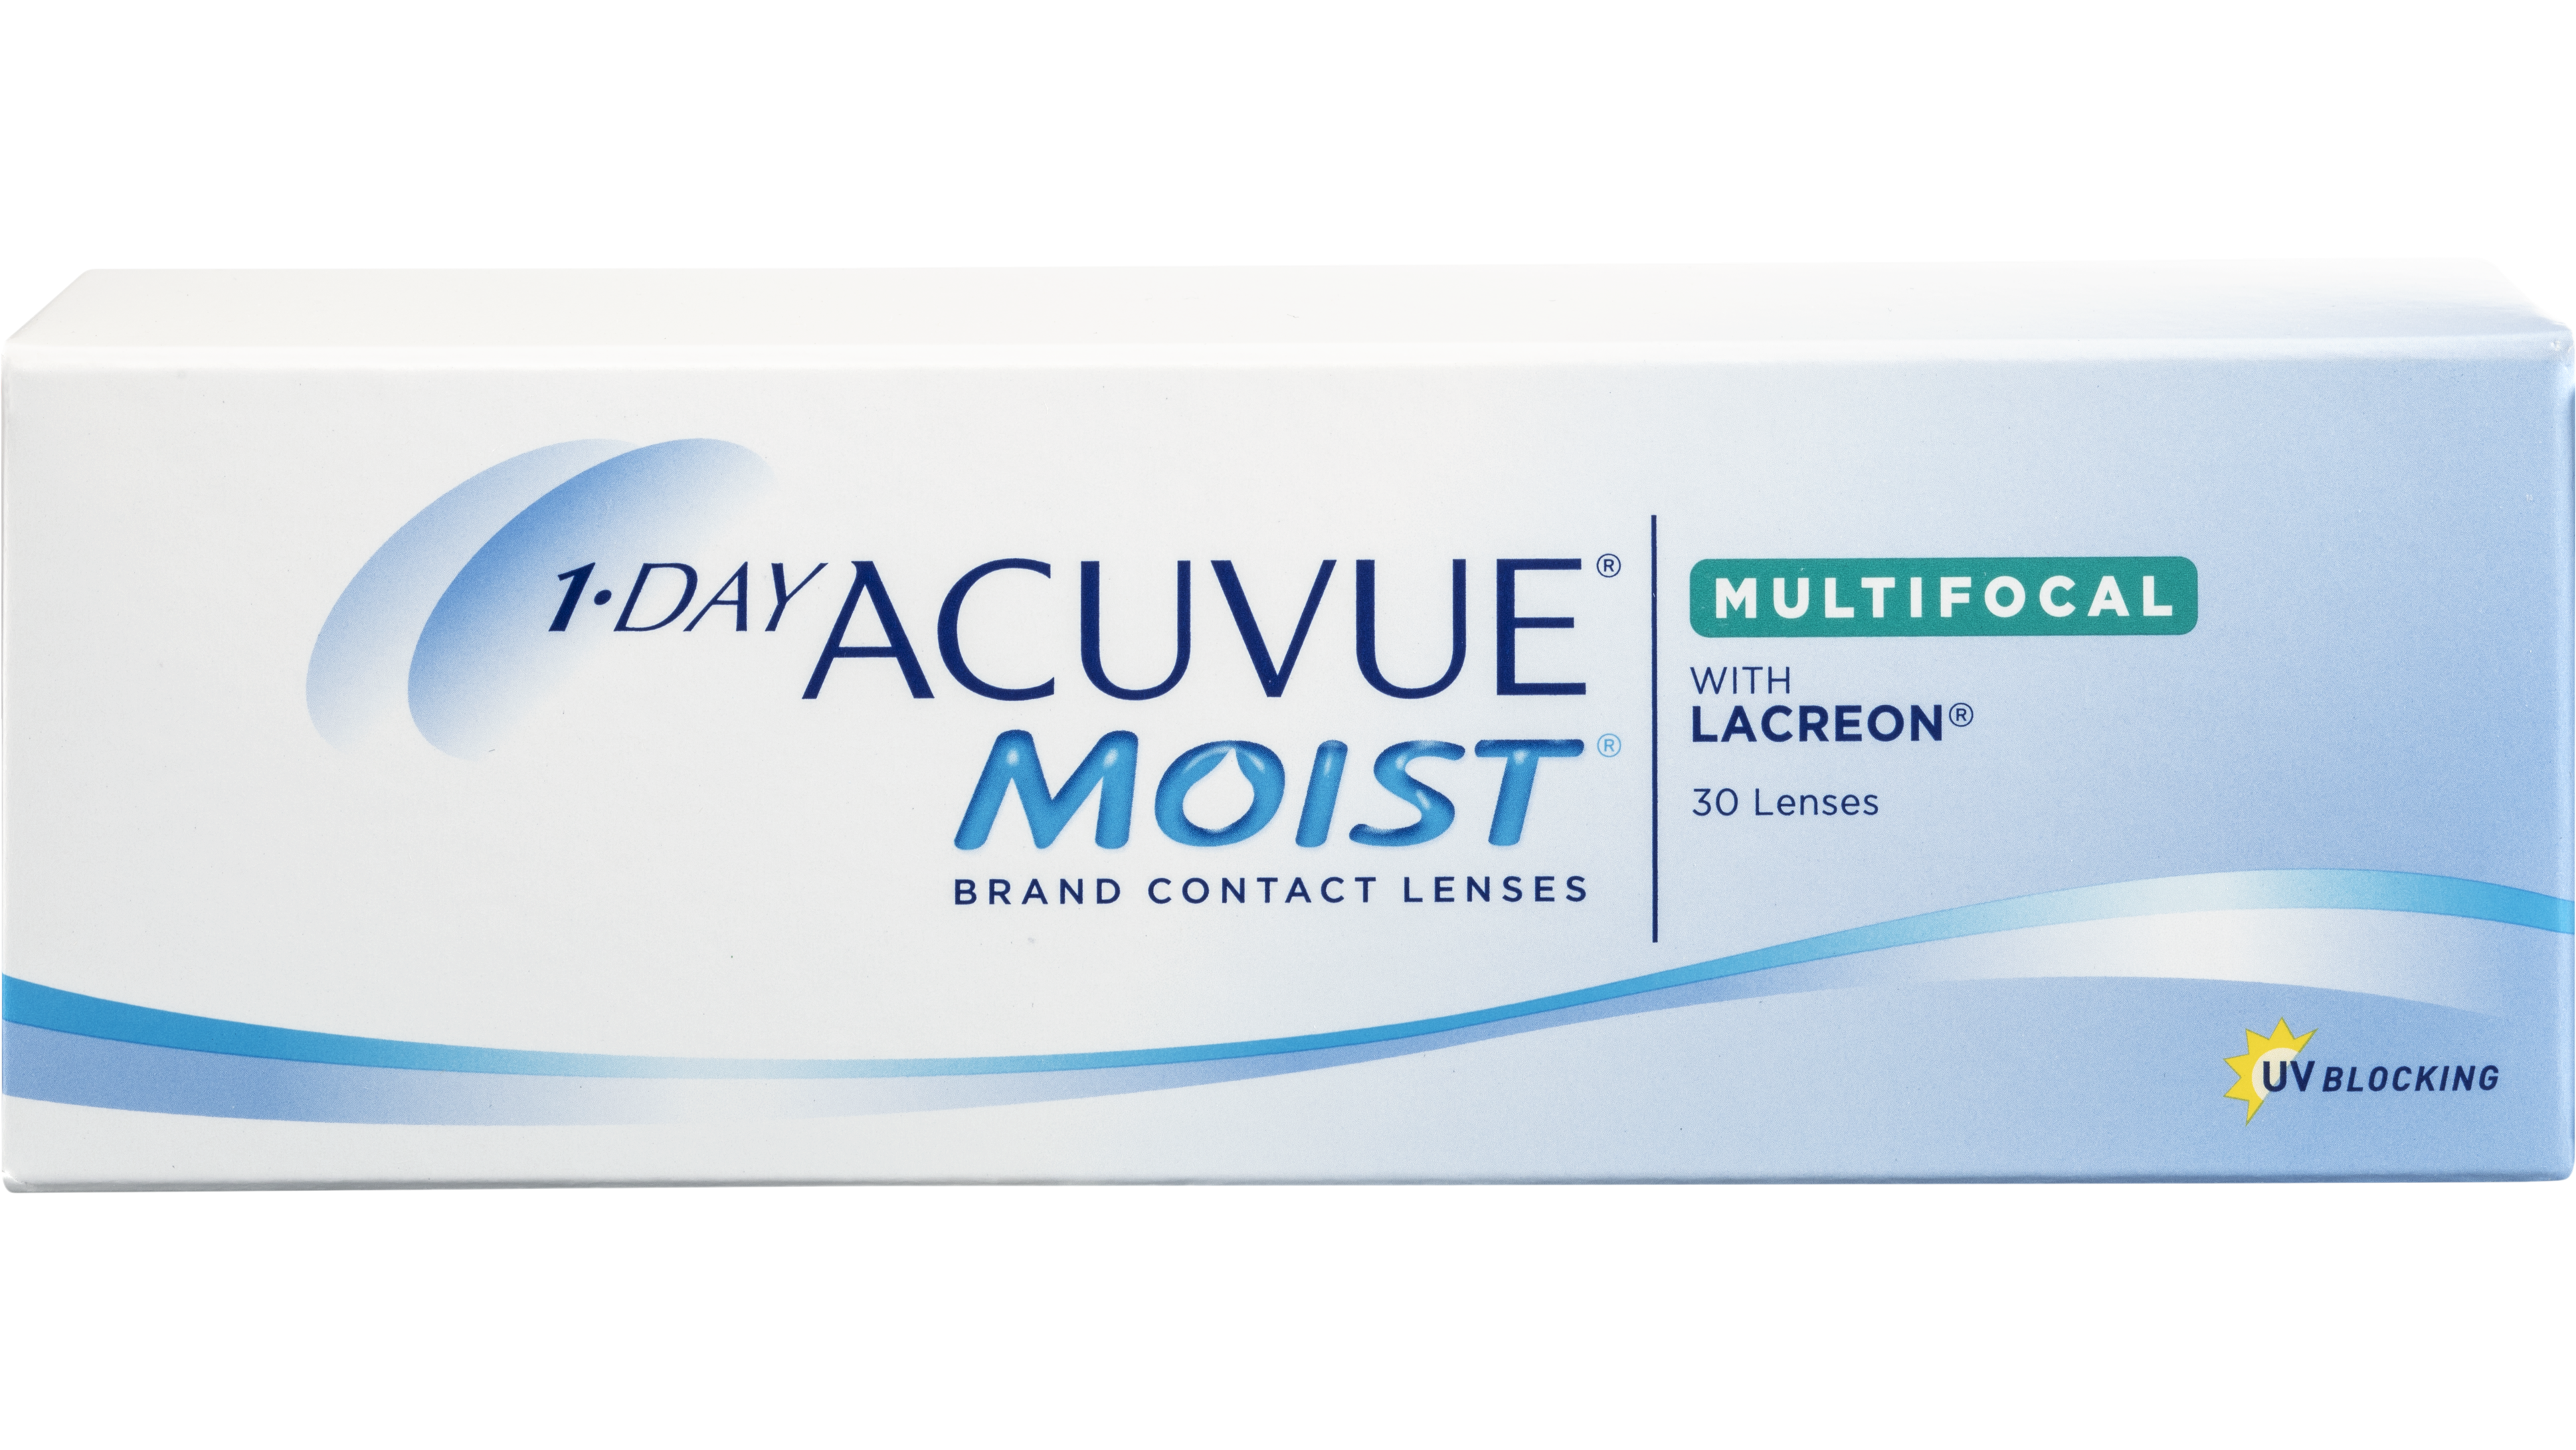 Front 1 Day Acuvue Moist Multifocaal